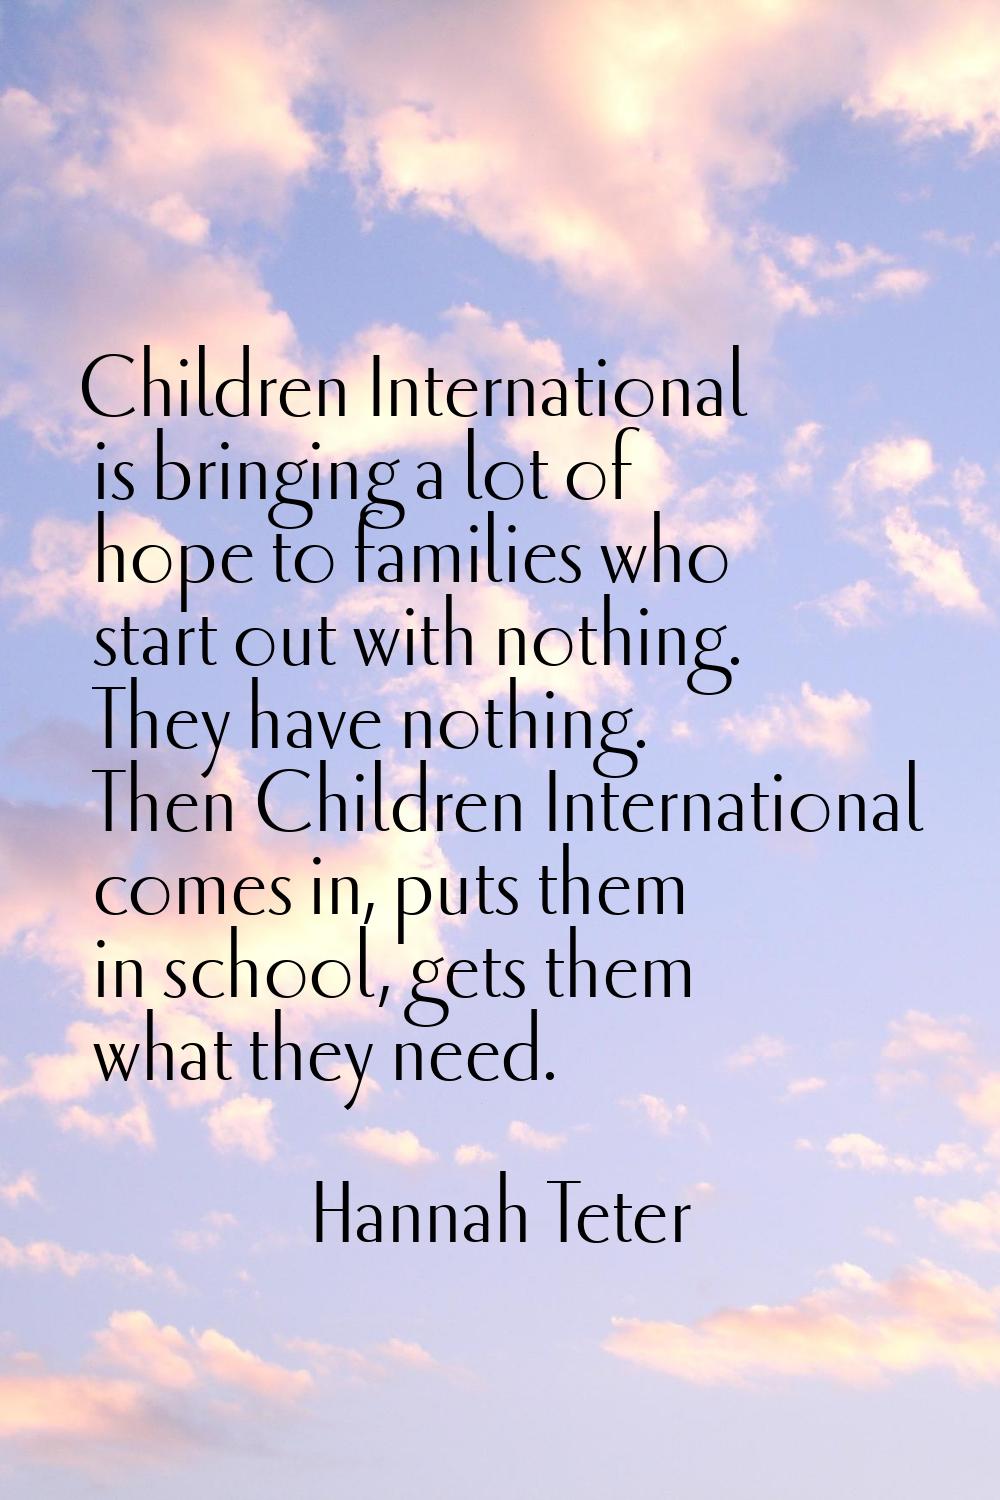 Children International is bringing a lot of hope to families who start out with nothing. They have 